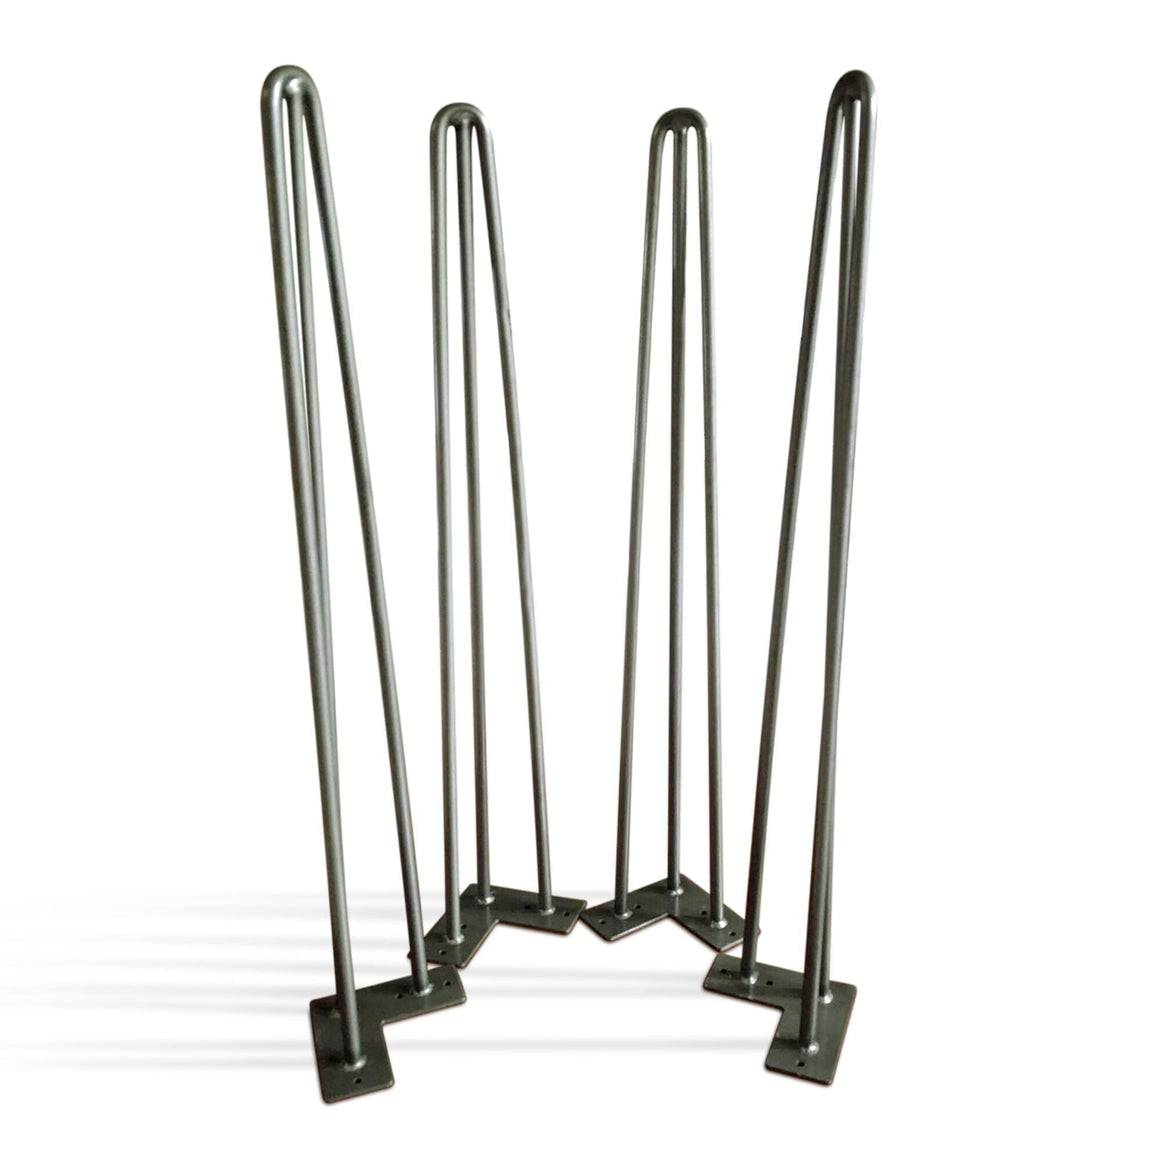 Premium 3 Rod Hairpin Table Legs 1/2" Steel - Set of 4 - 28" Tall - Rustic Deco Incorporated